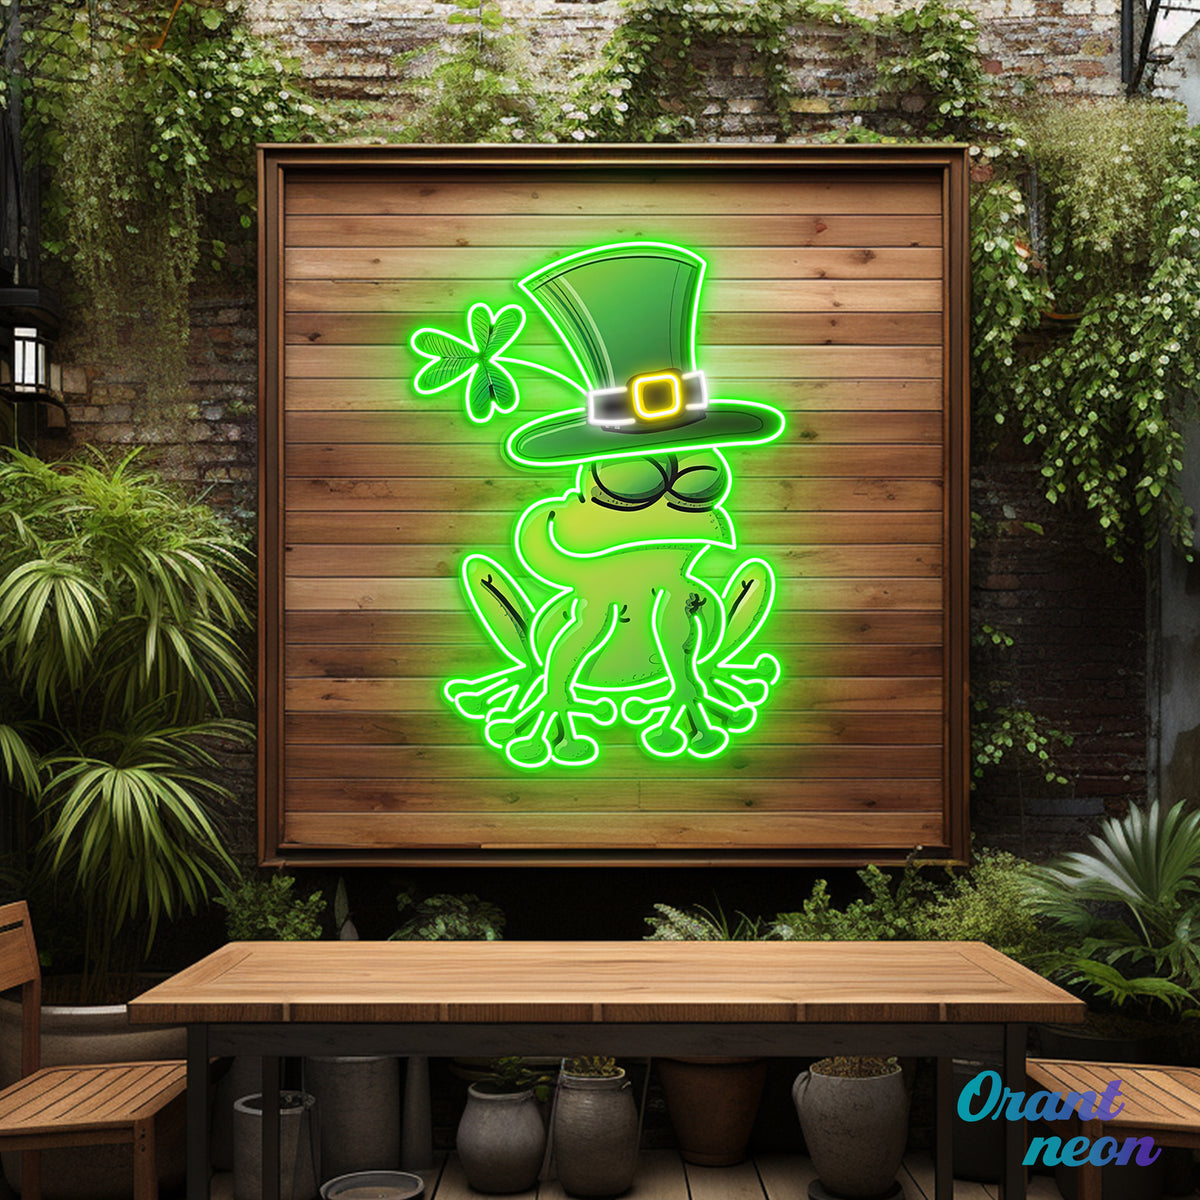 Patrick's Day Frog Wearing Hat and Sleeping Led Neon Acrylic Artwork